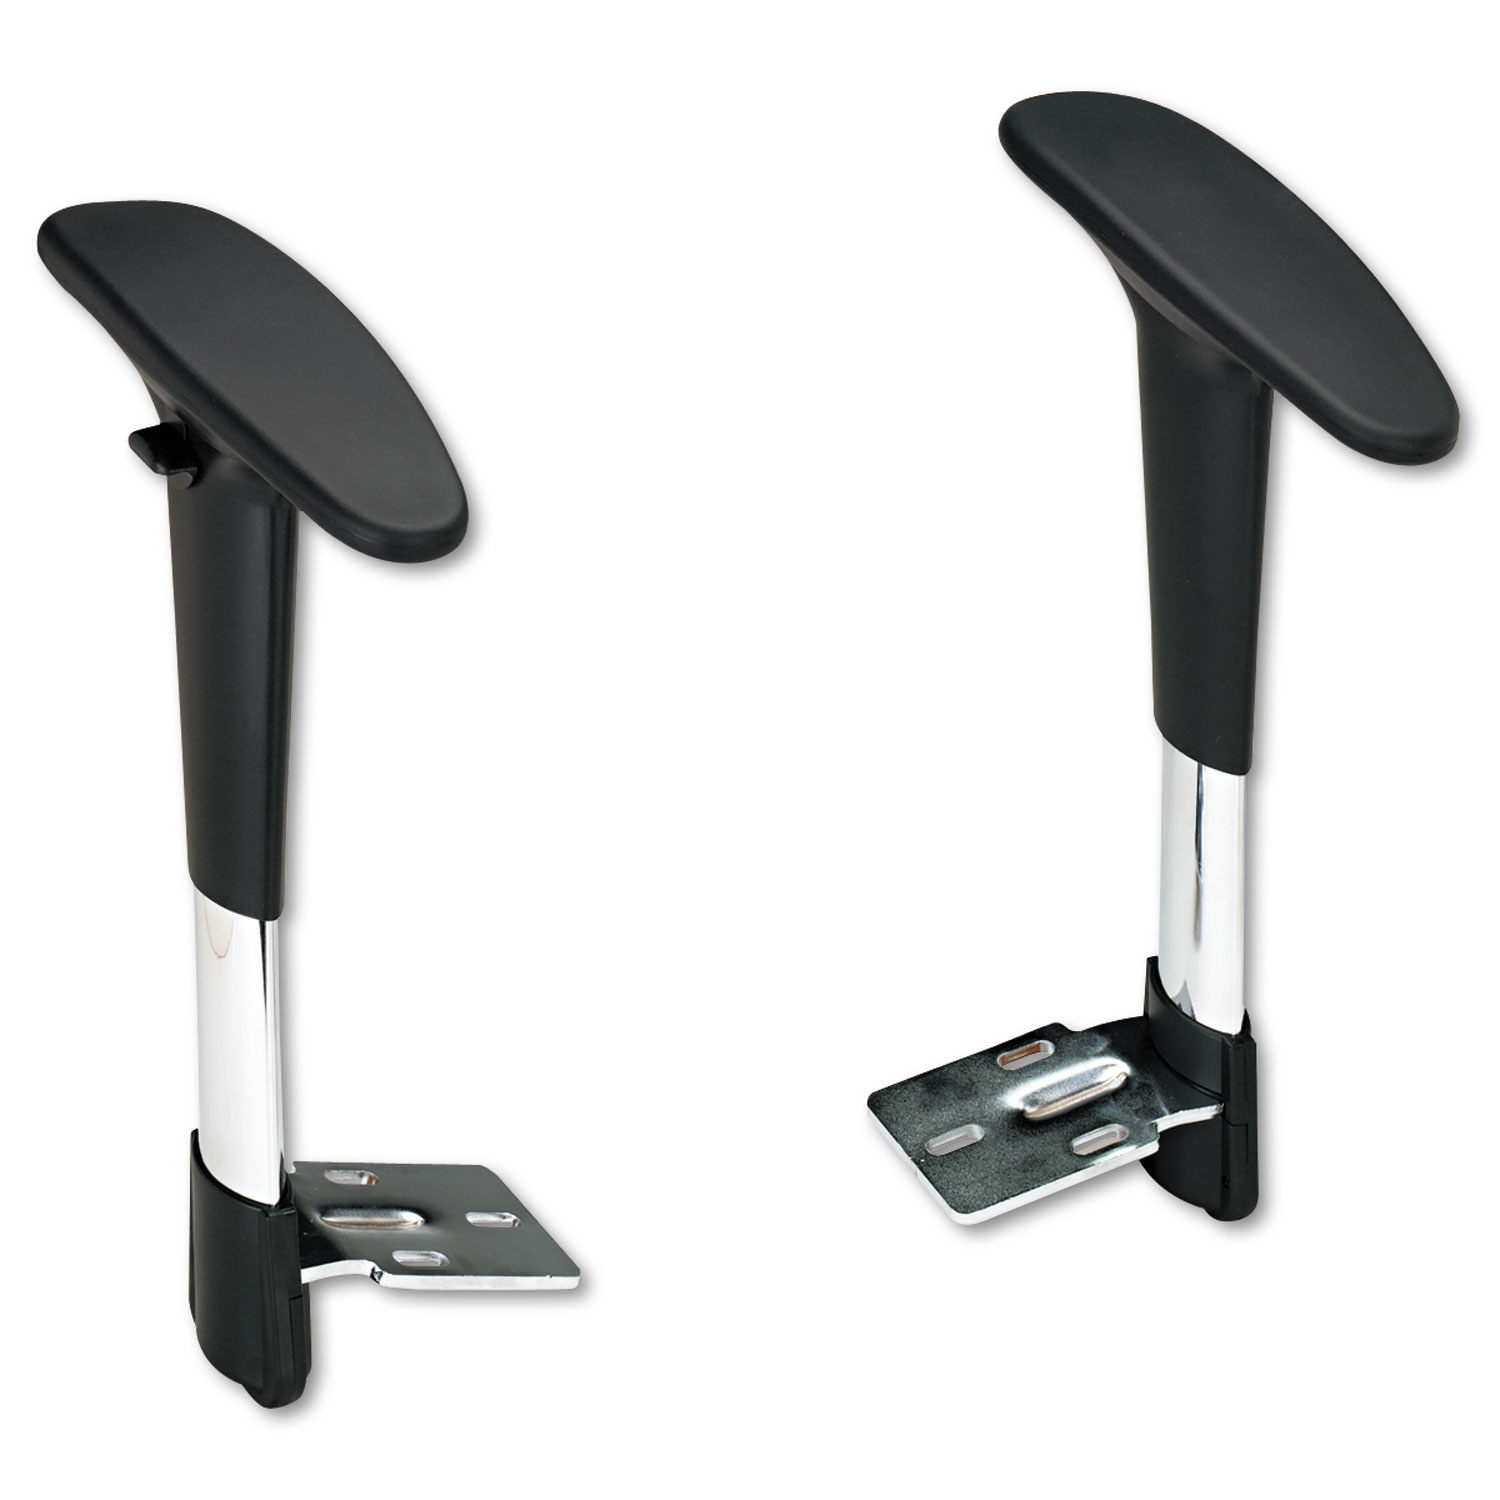  Safco 3495BL Adjustable T-Pad Arms for Metro Series Extended-Height Chairs, Black/Chrome (SAF3495BL) 